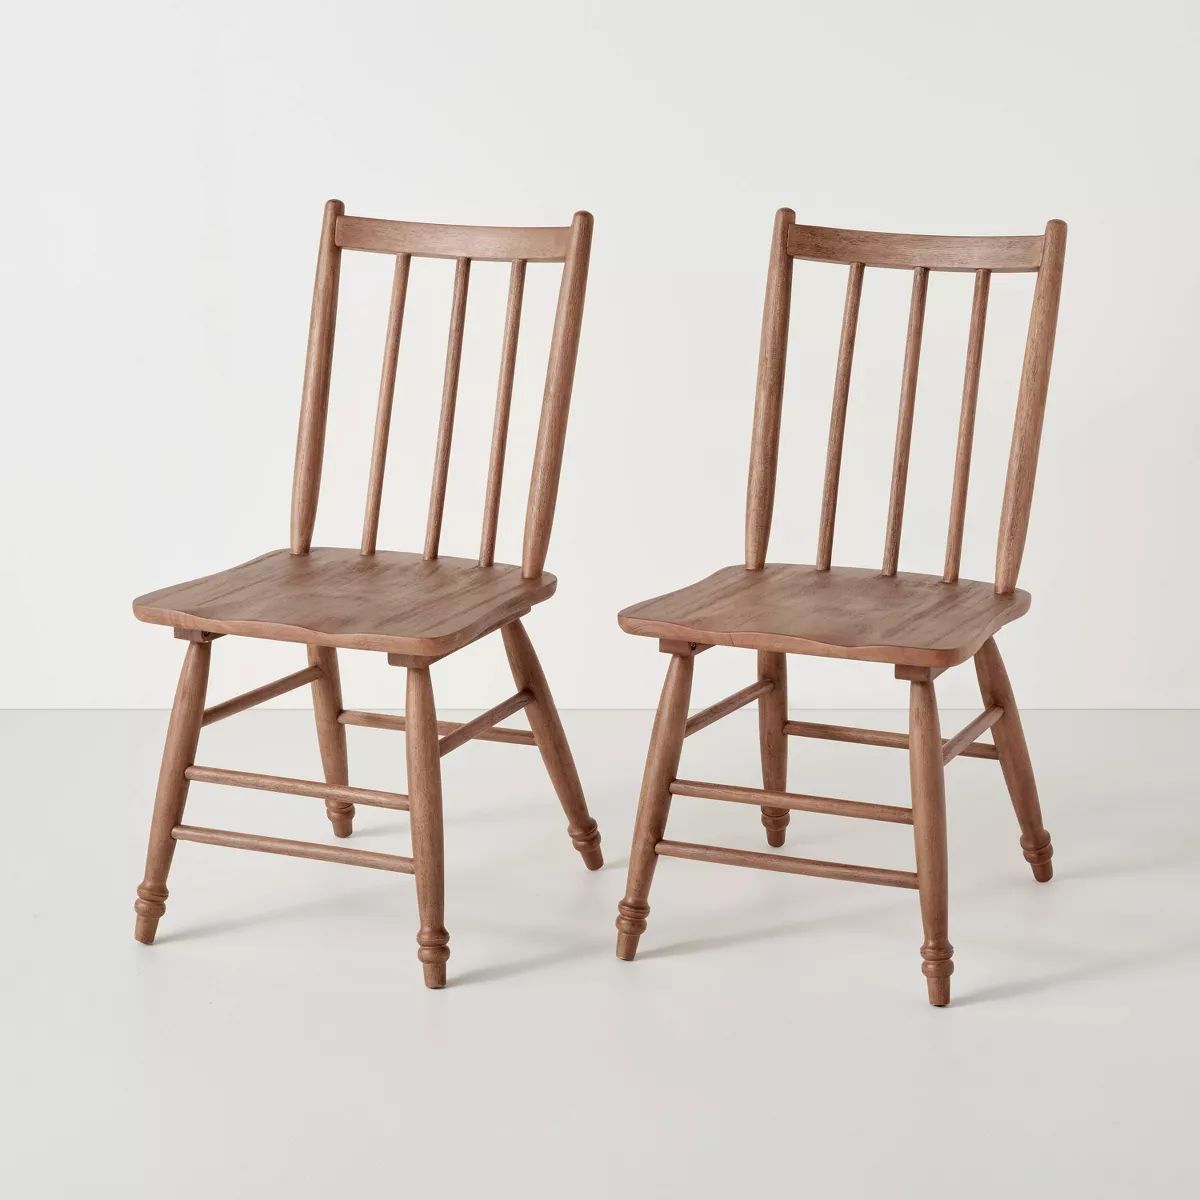 2pk Vintage Windsor Dining Chairs - Aged Oak - Hearth & Hand™ with Magnolia | Target